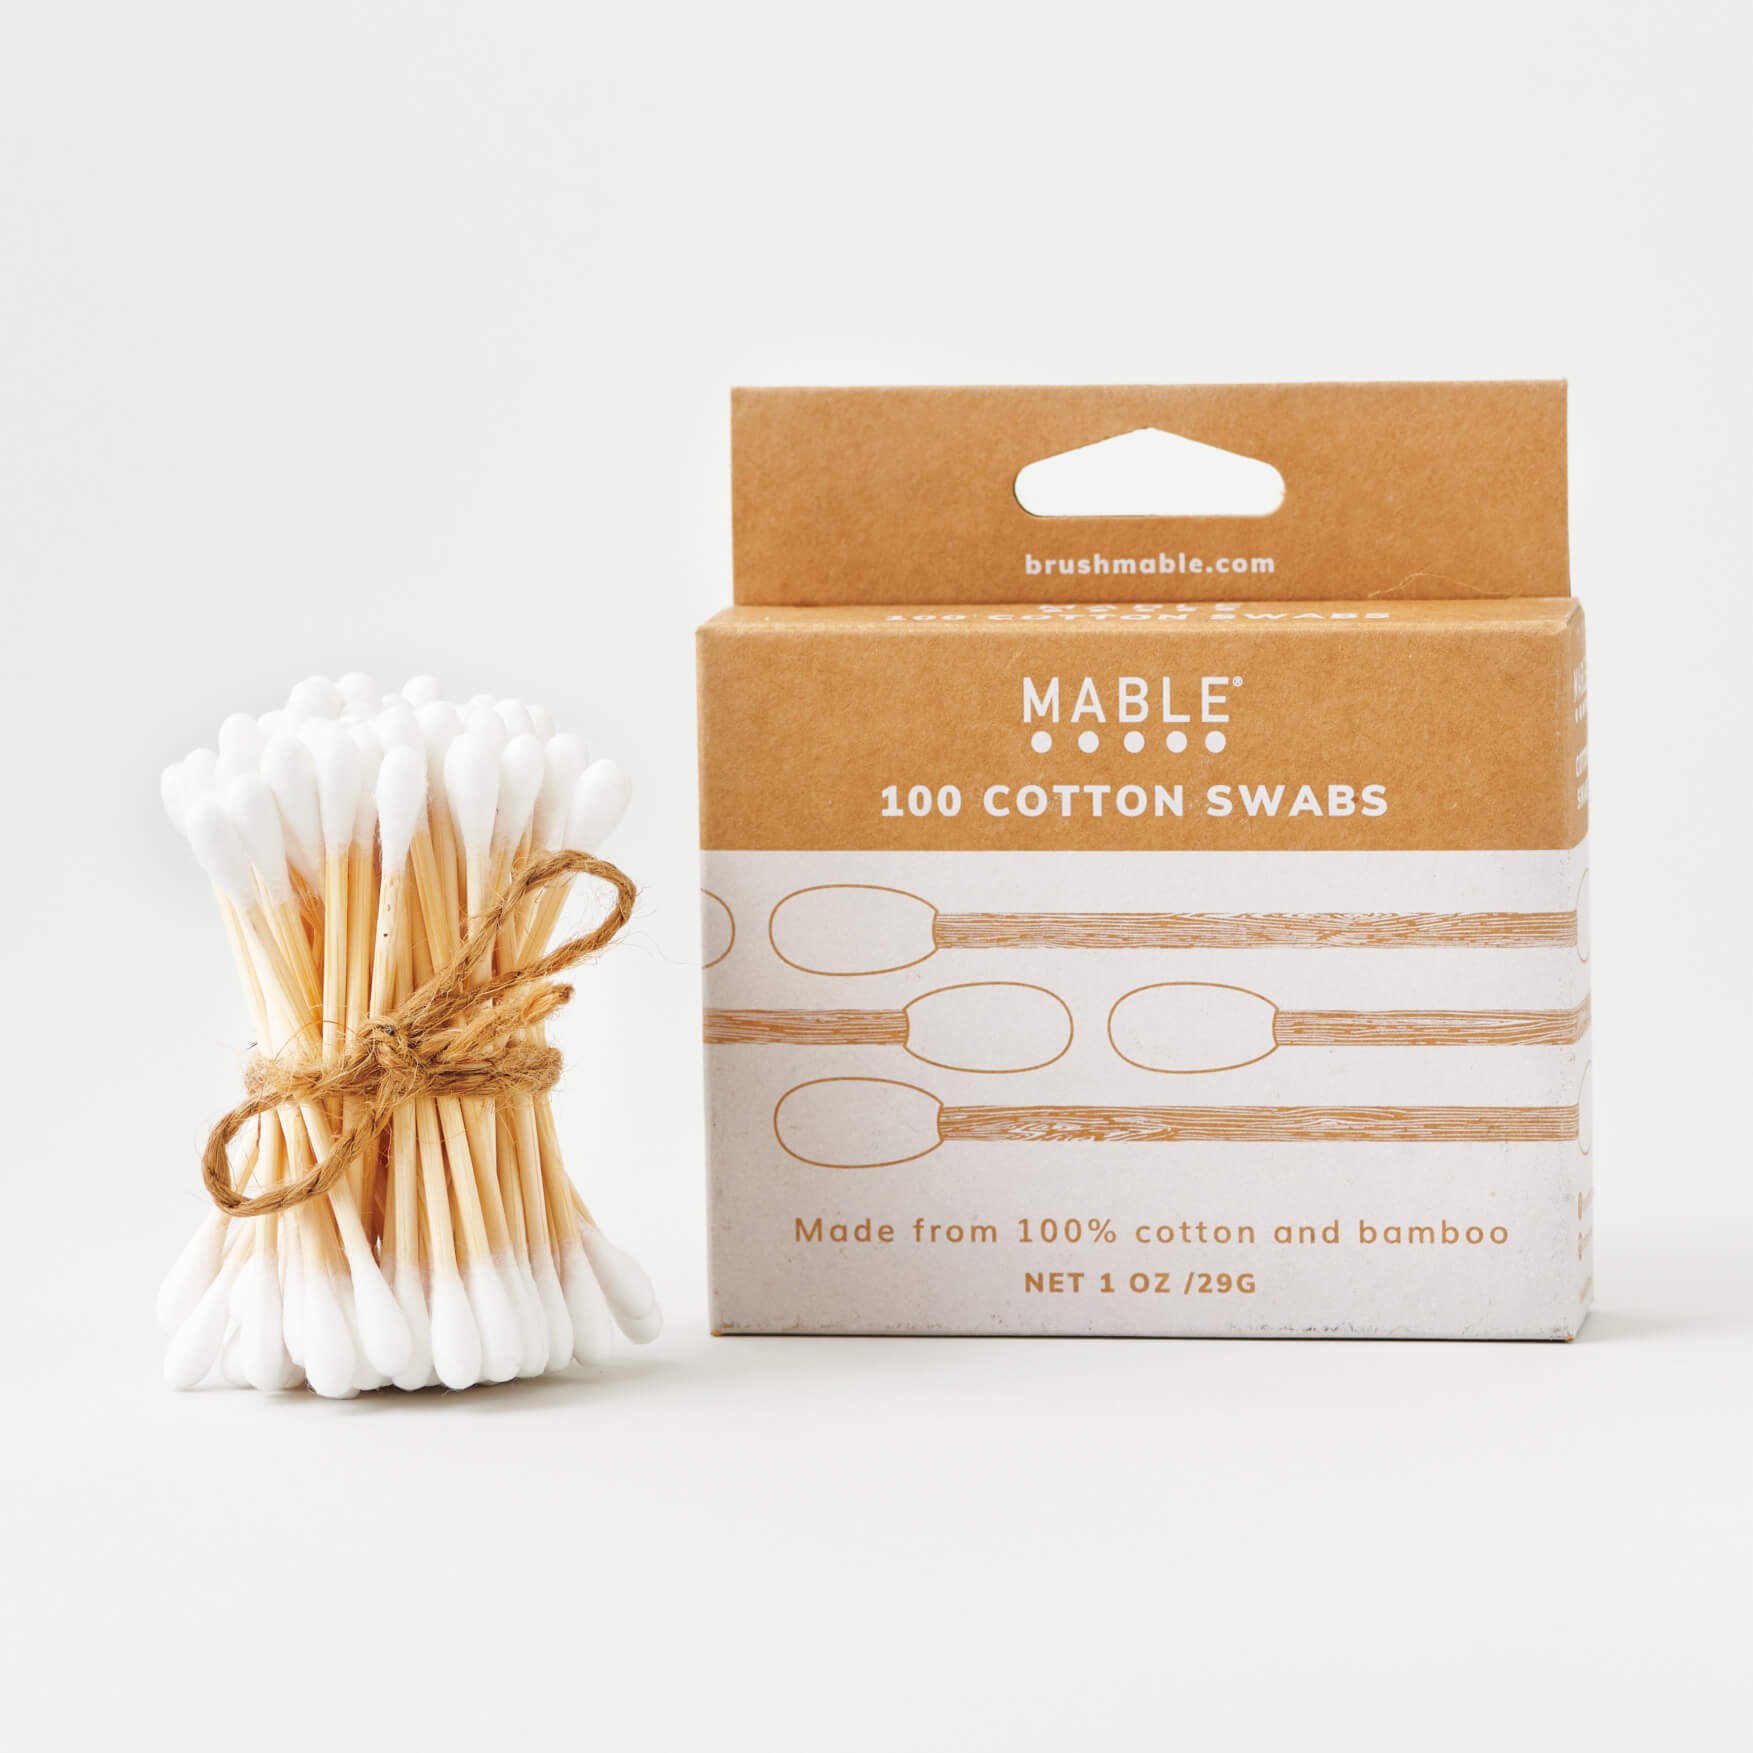 MABLE cotton swabs, MABLE cotton buds, bamboo cotton buds, bamboo cotton swabs, cotton buds, eco cotton swabs, plastic-free cotton swabs, ear cleaners, eco ear cleaners